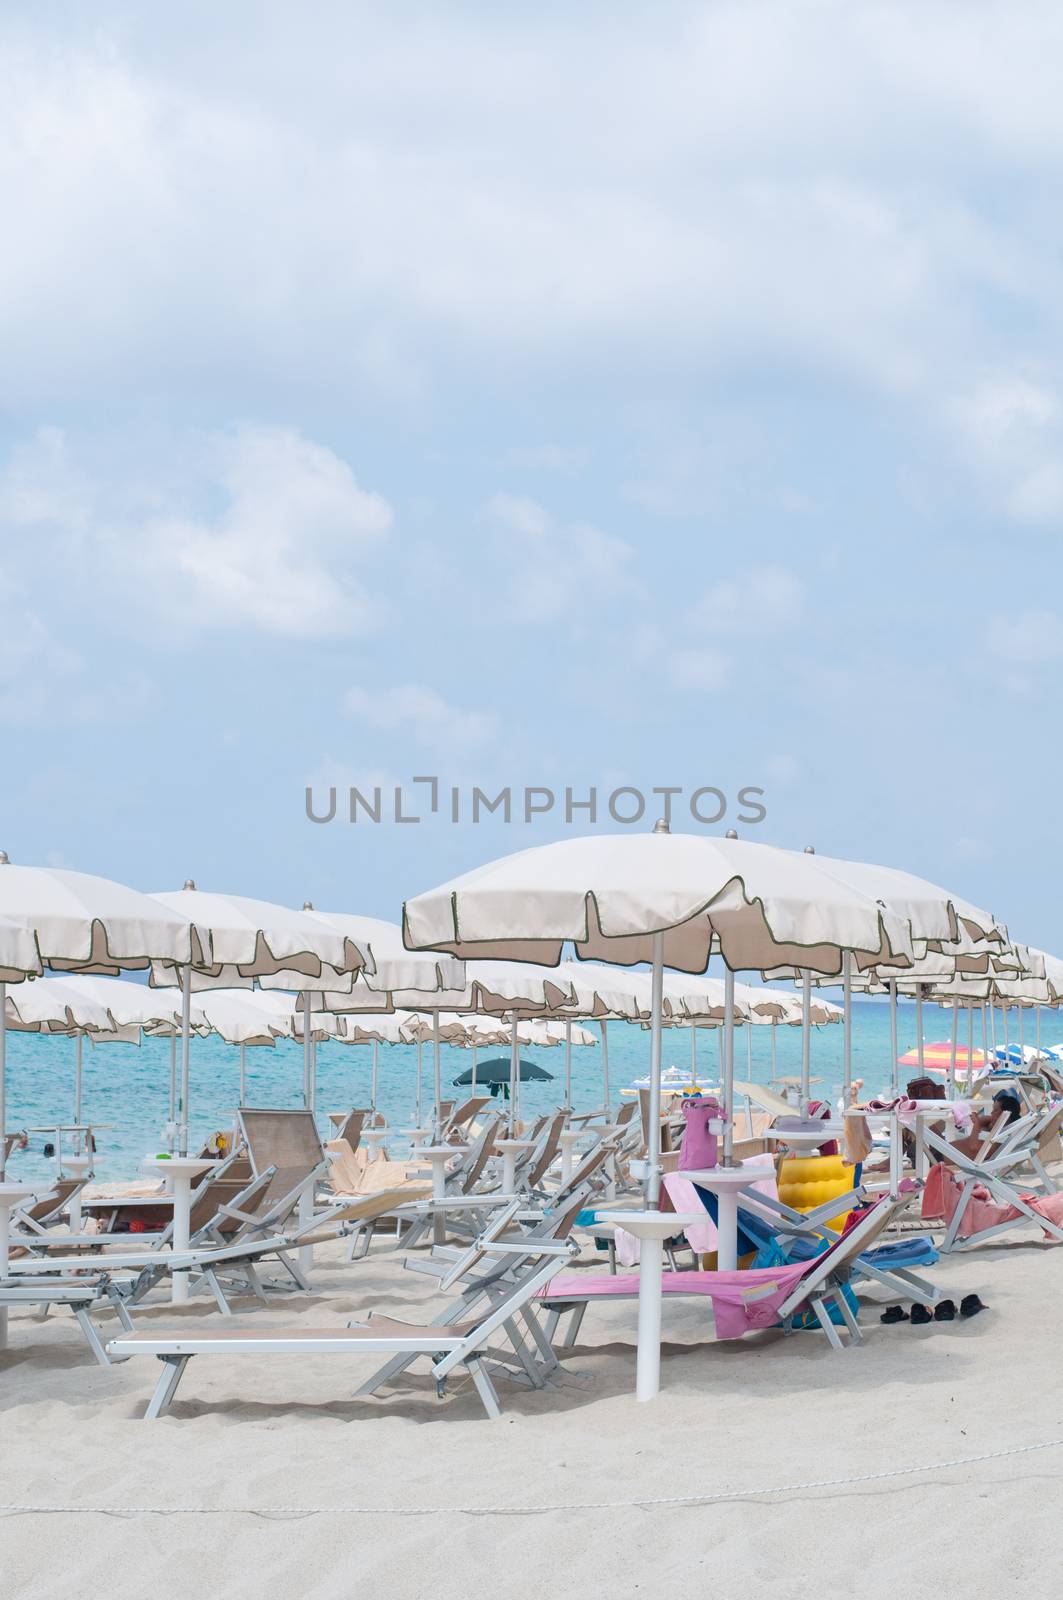 Many umbrellas and chairs at a resort in southern Italy